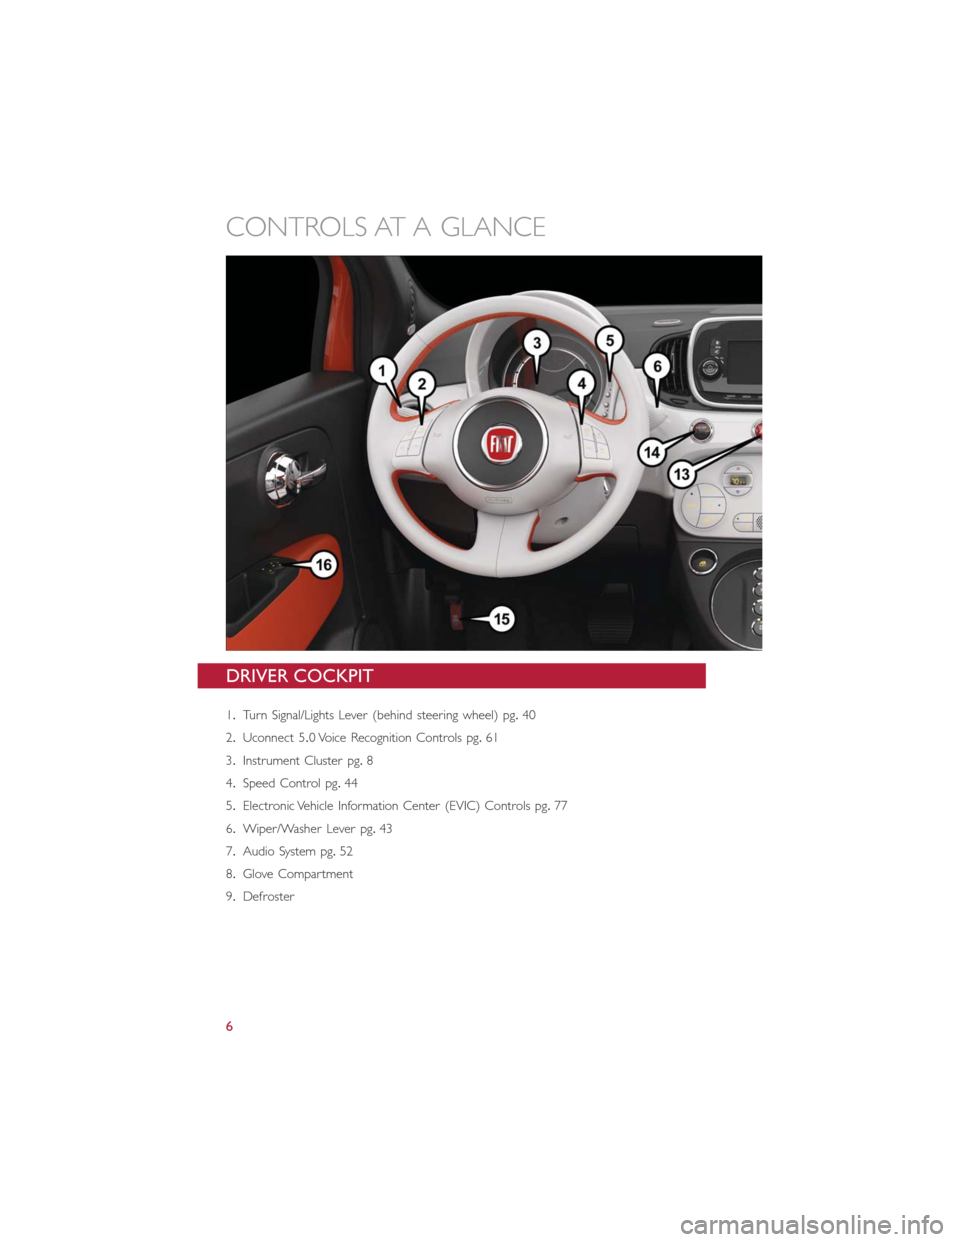 FIAT 500E 2016 2.G User Guide DRIVER COCKPIT
1.Turn Signal/Lights Lever (behind steering wheel) pg.40
2.Uconnect 5.0 Voice Recognition Controls pg.61
3.Instrument Cluster pg.8
4.Speed Control pg.44
5.Electronic Vehicle Information